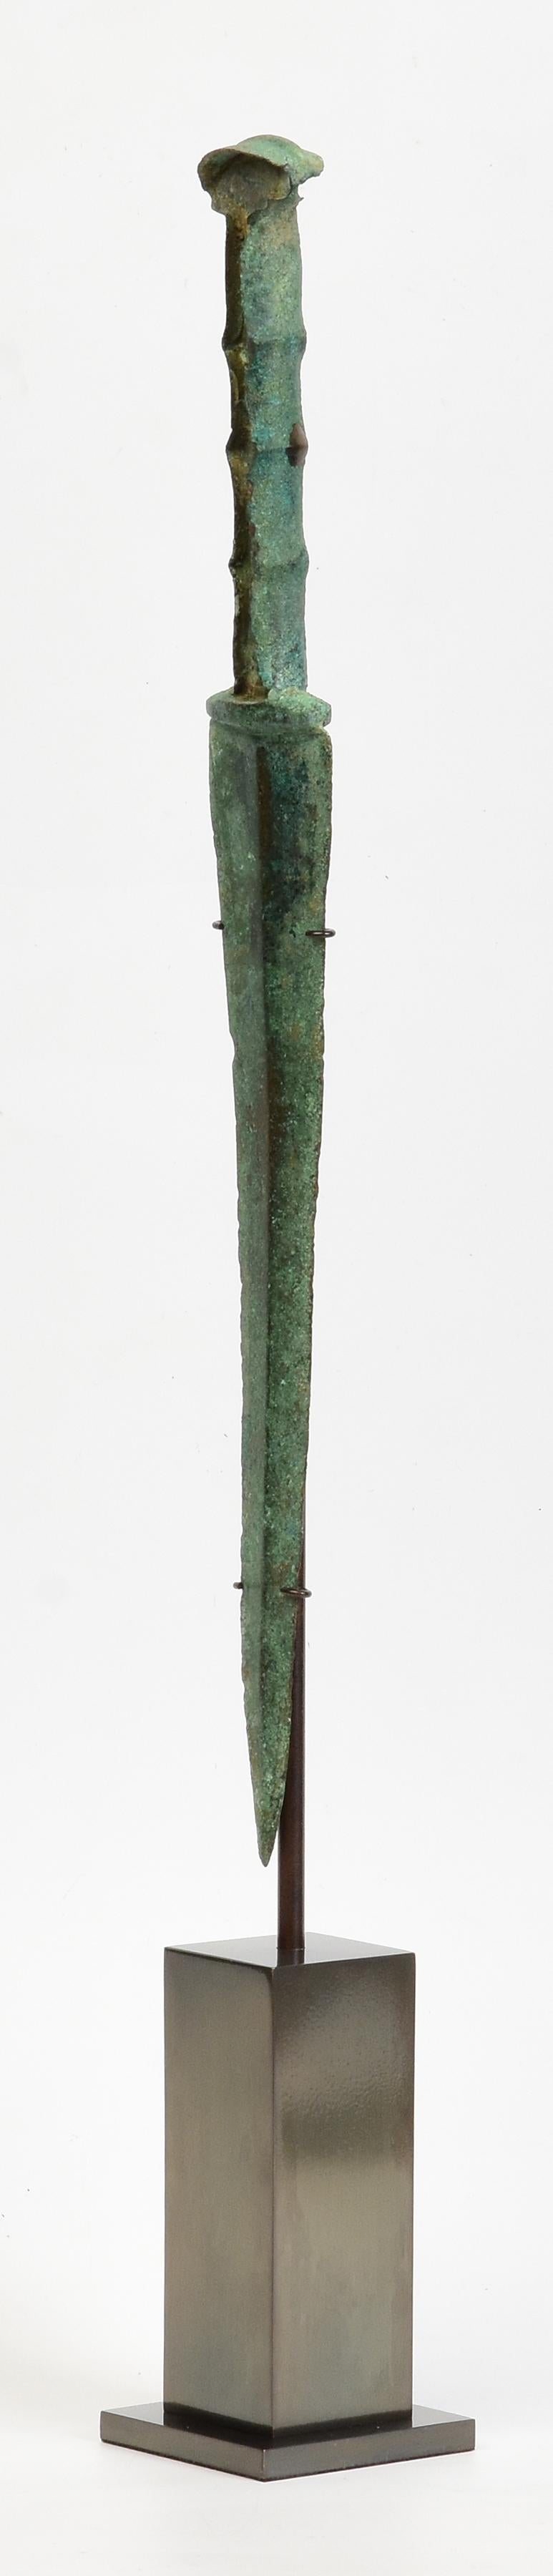 Ancient Antique Luristan Bronze Short Sword / Knife / Early Iron Age Weapon For Sale 1